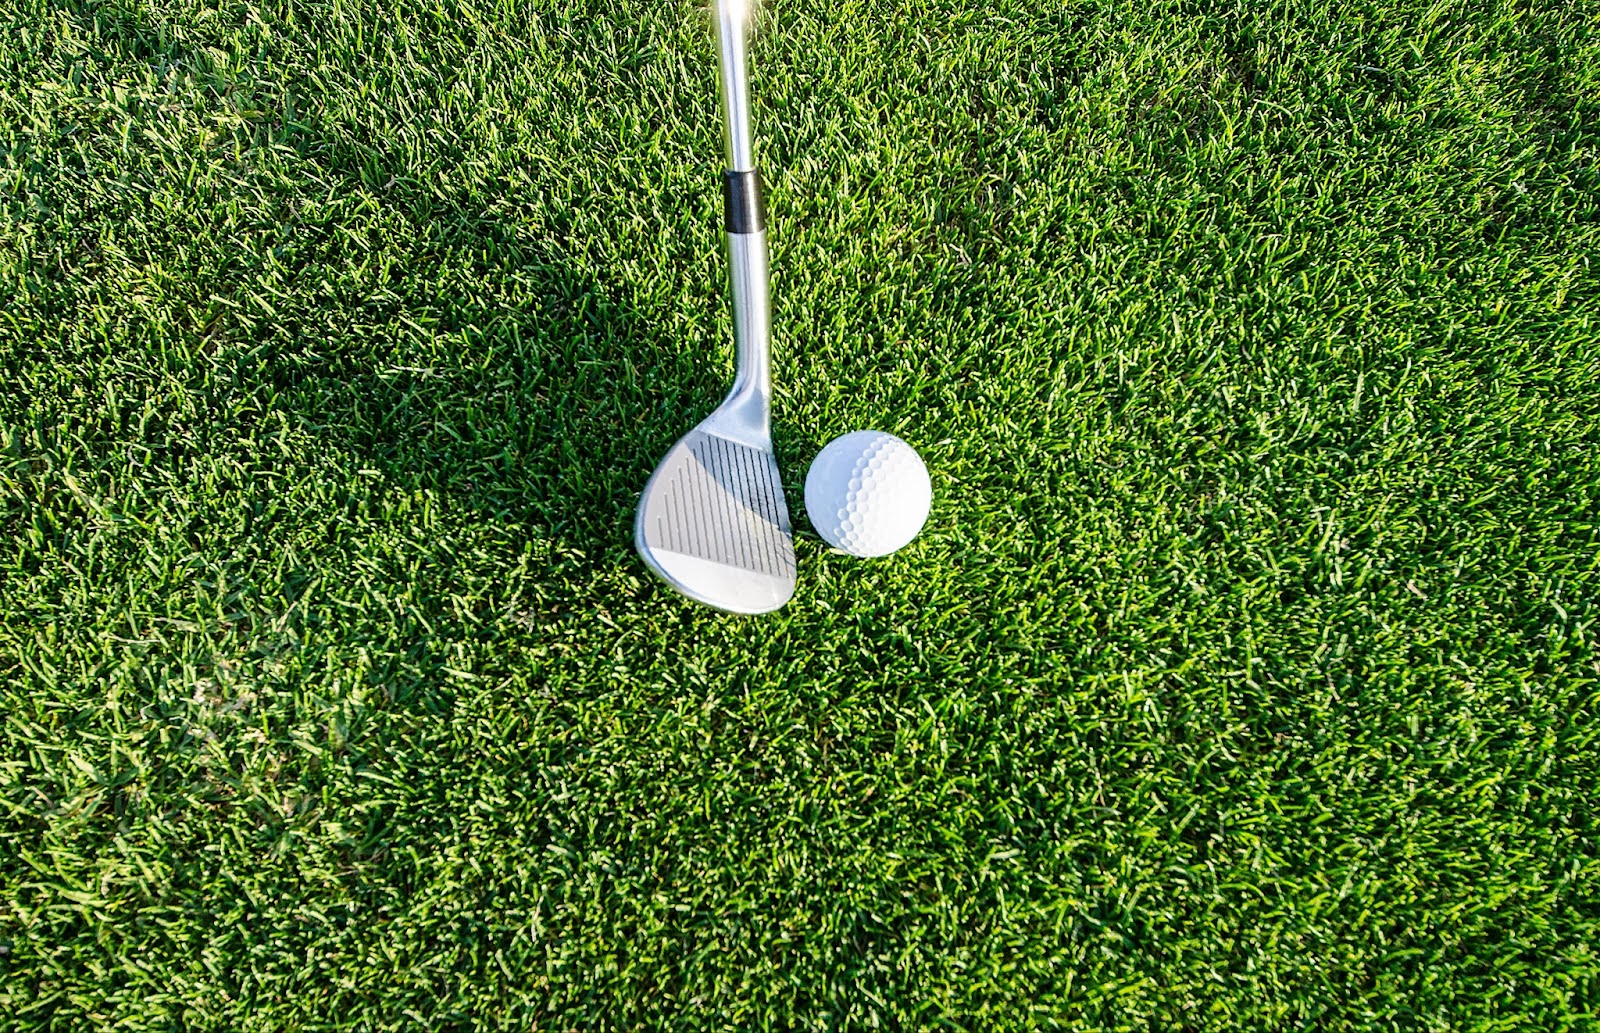 How to Break 100 in Golf: 5 Practical Tips to Get There